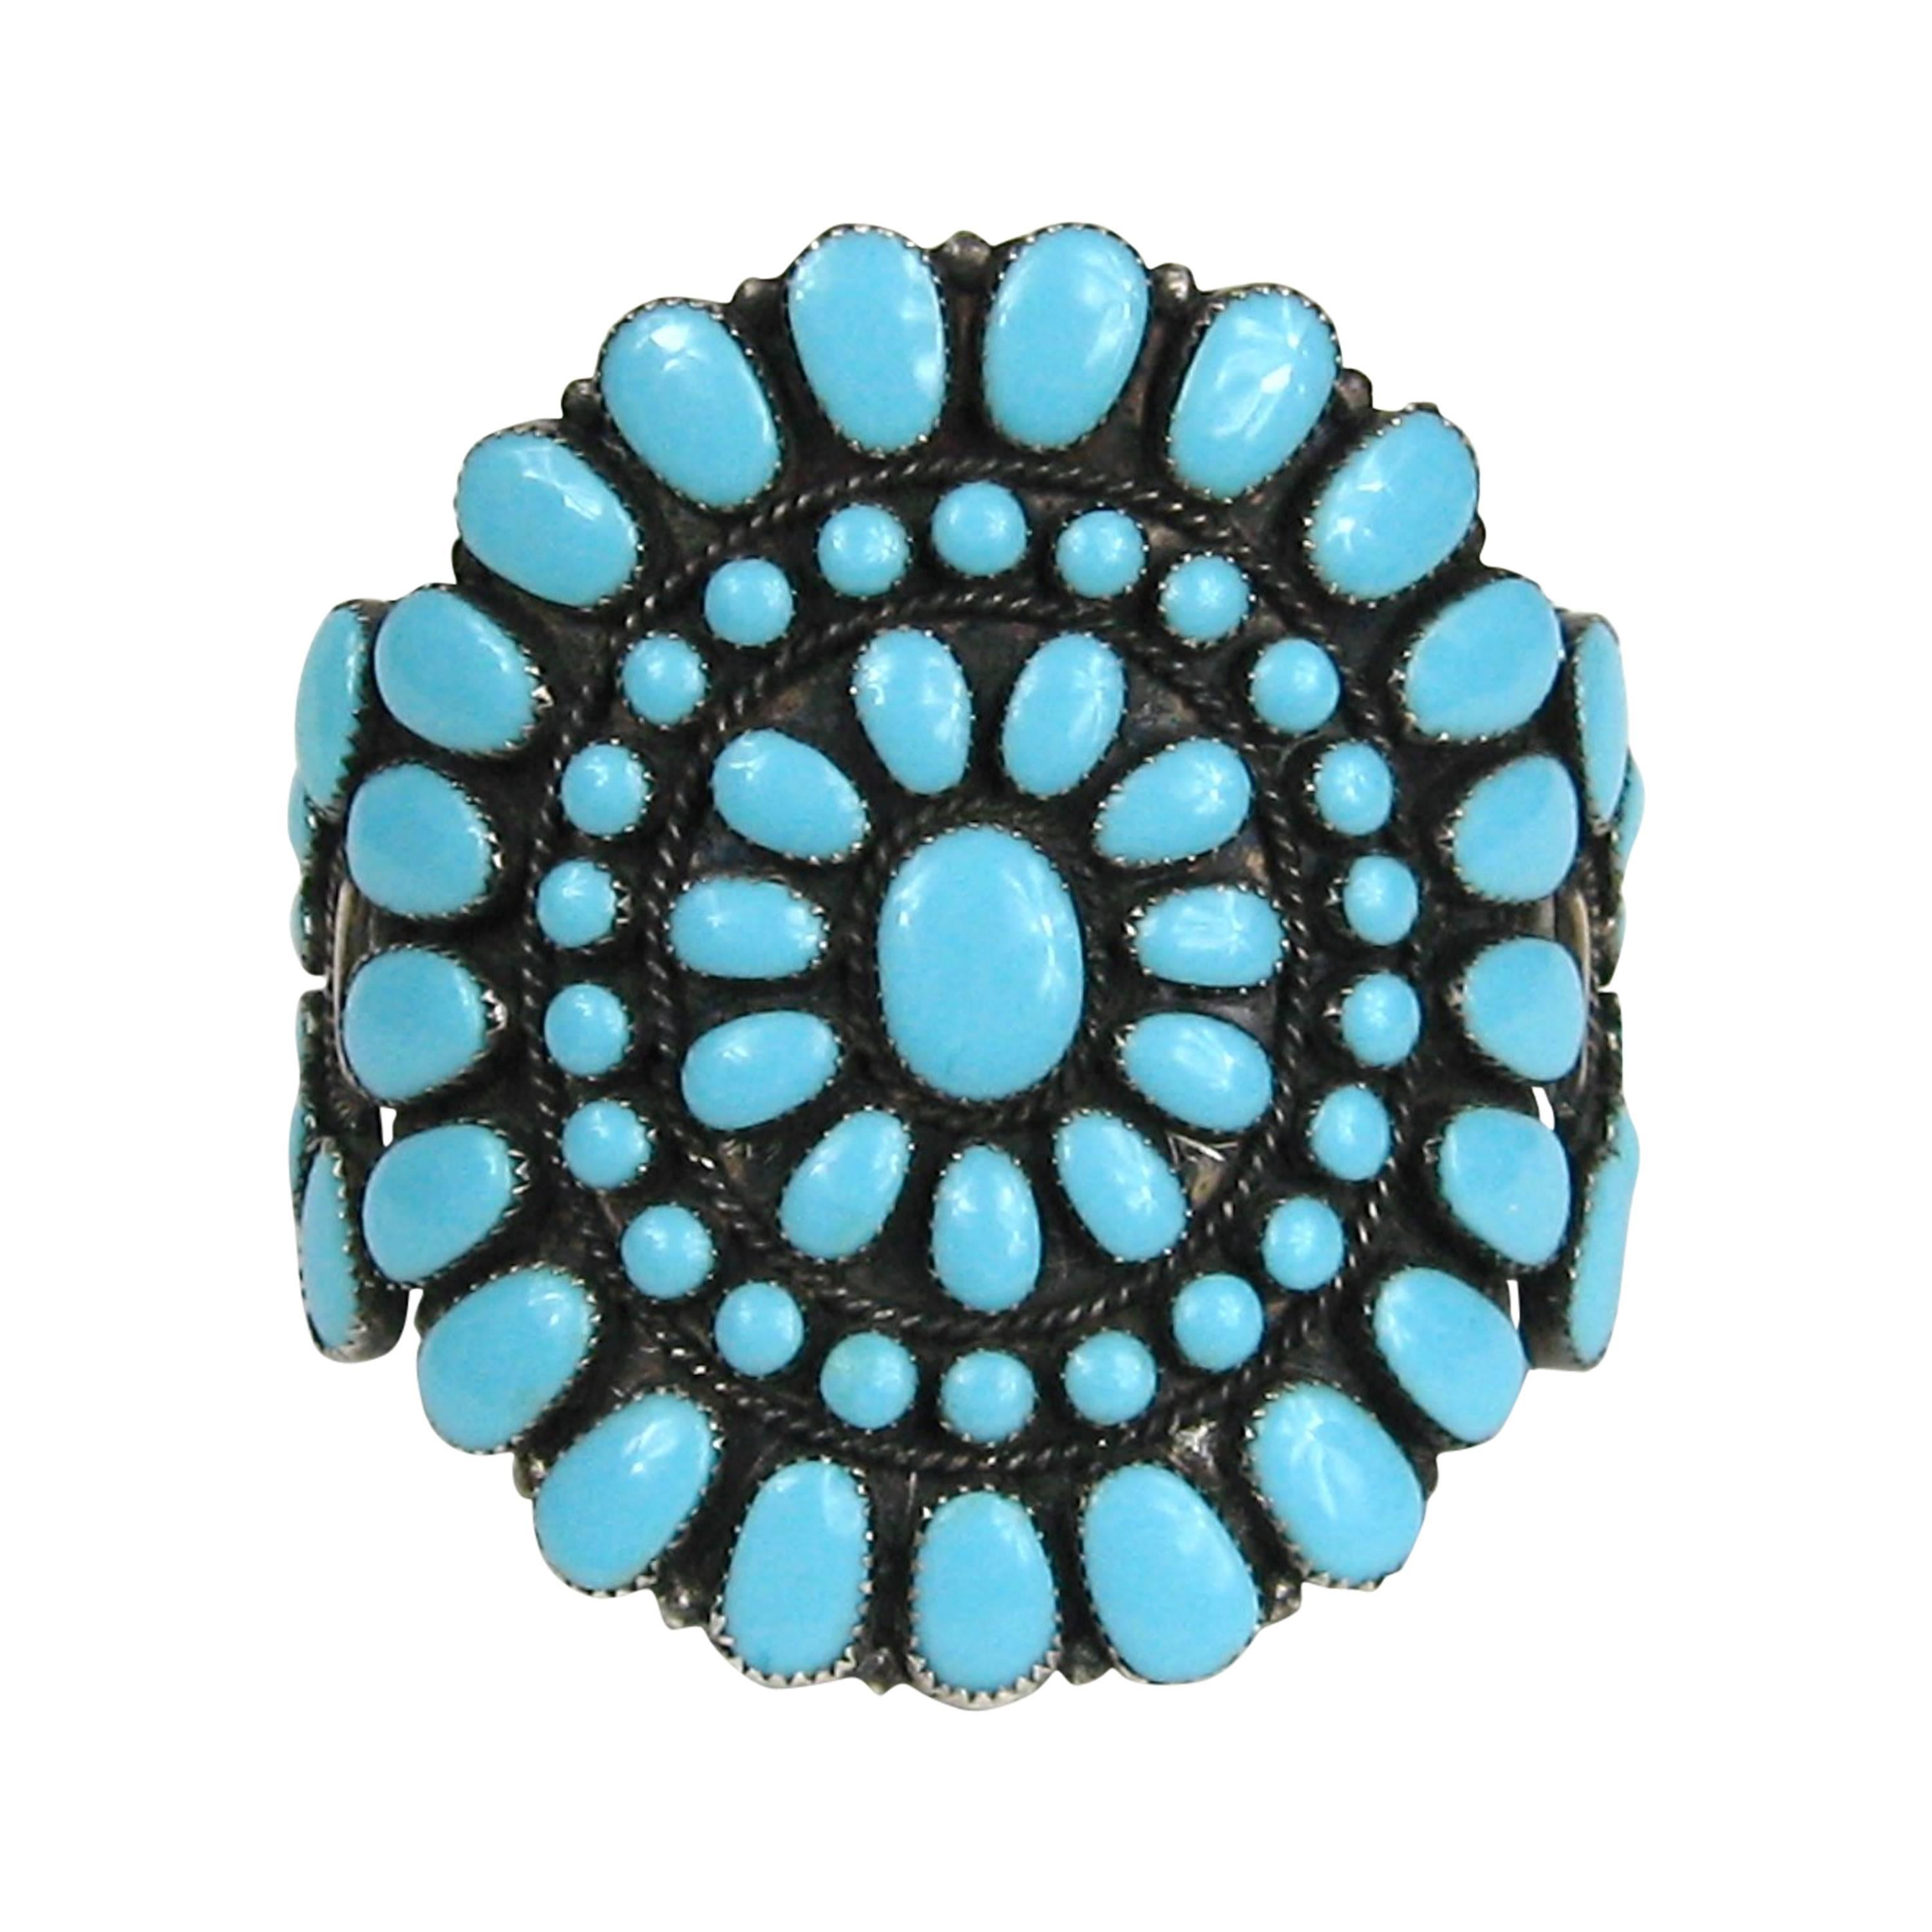 Turquoise Zuni Petit Point Cluster Cuff Bracelet from the 1960's